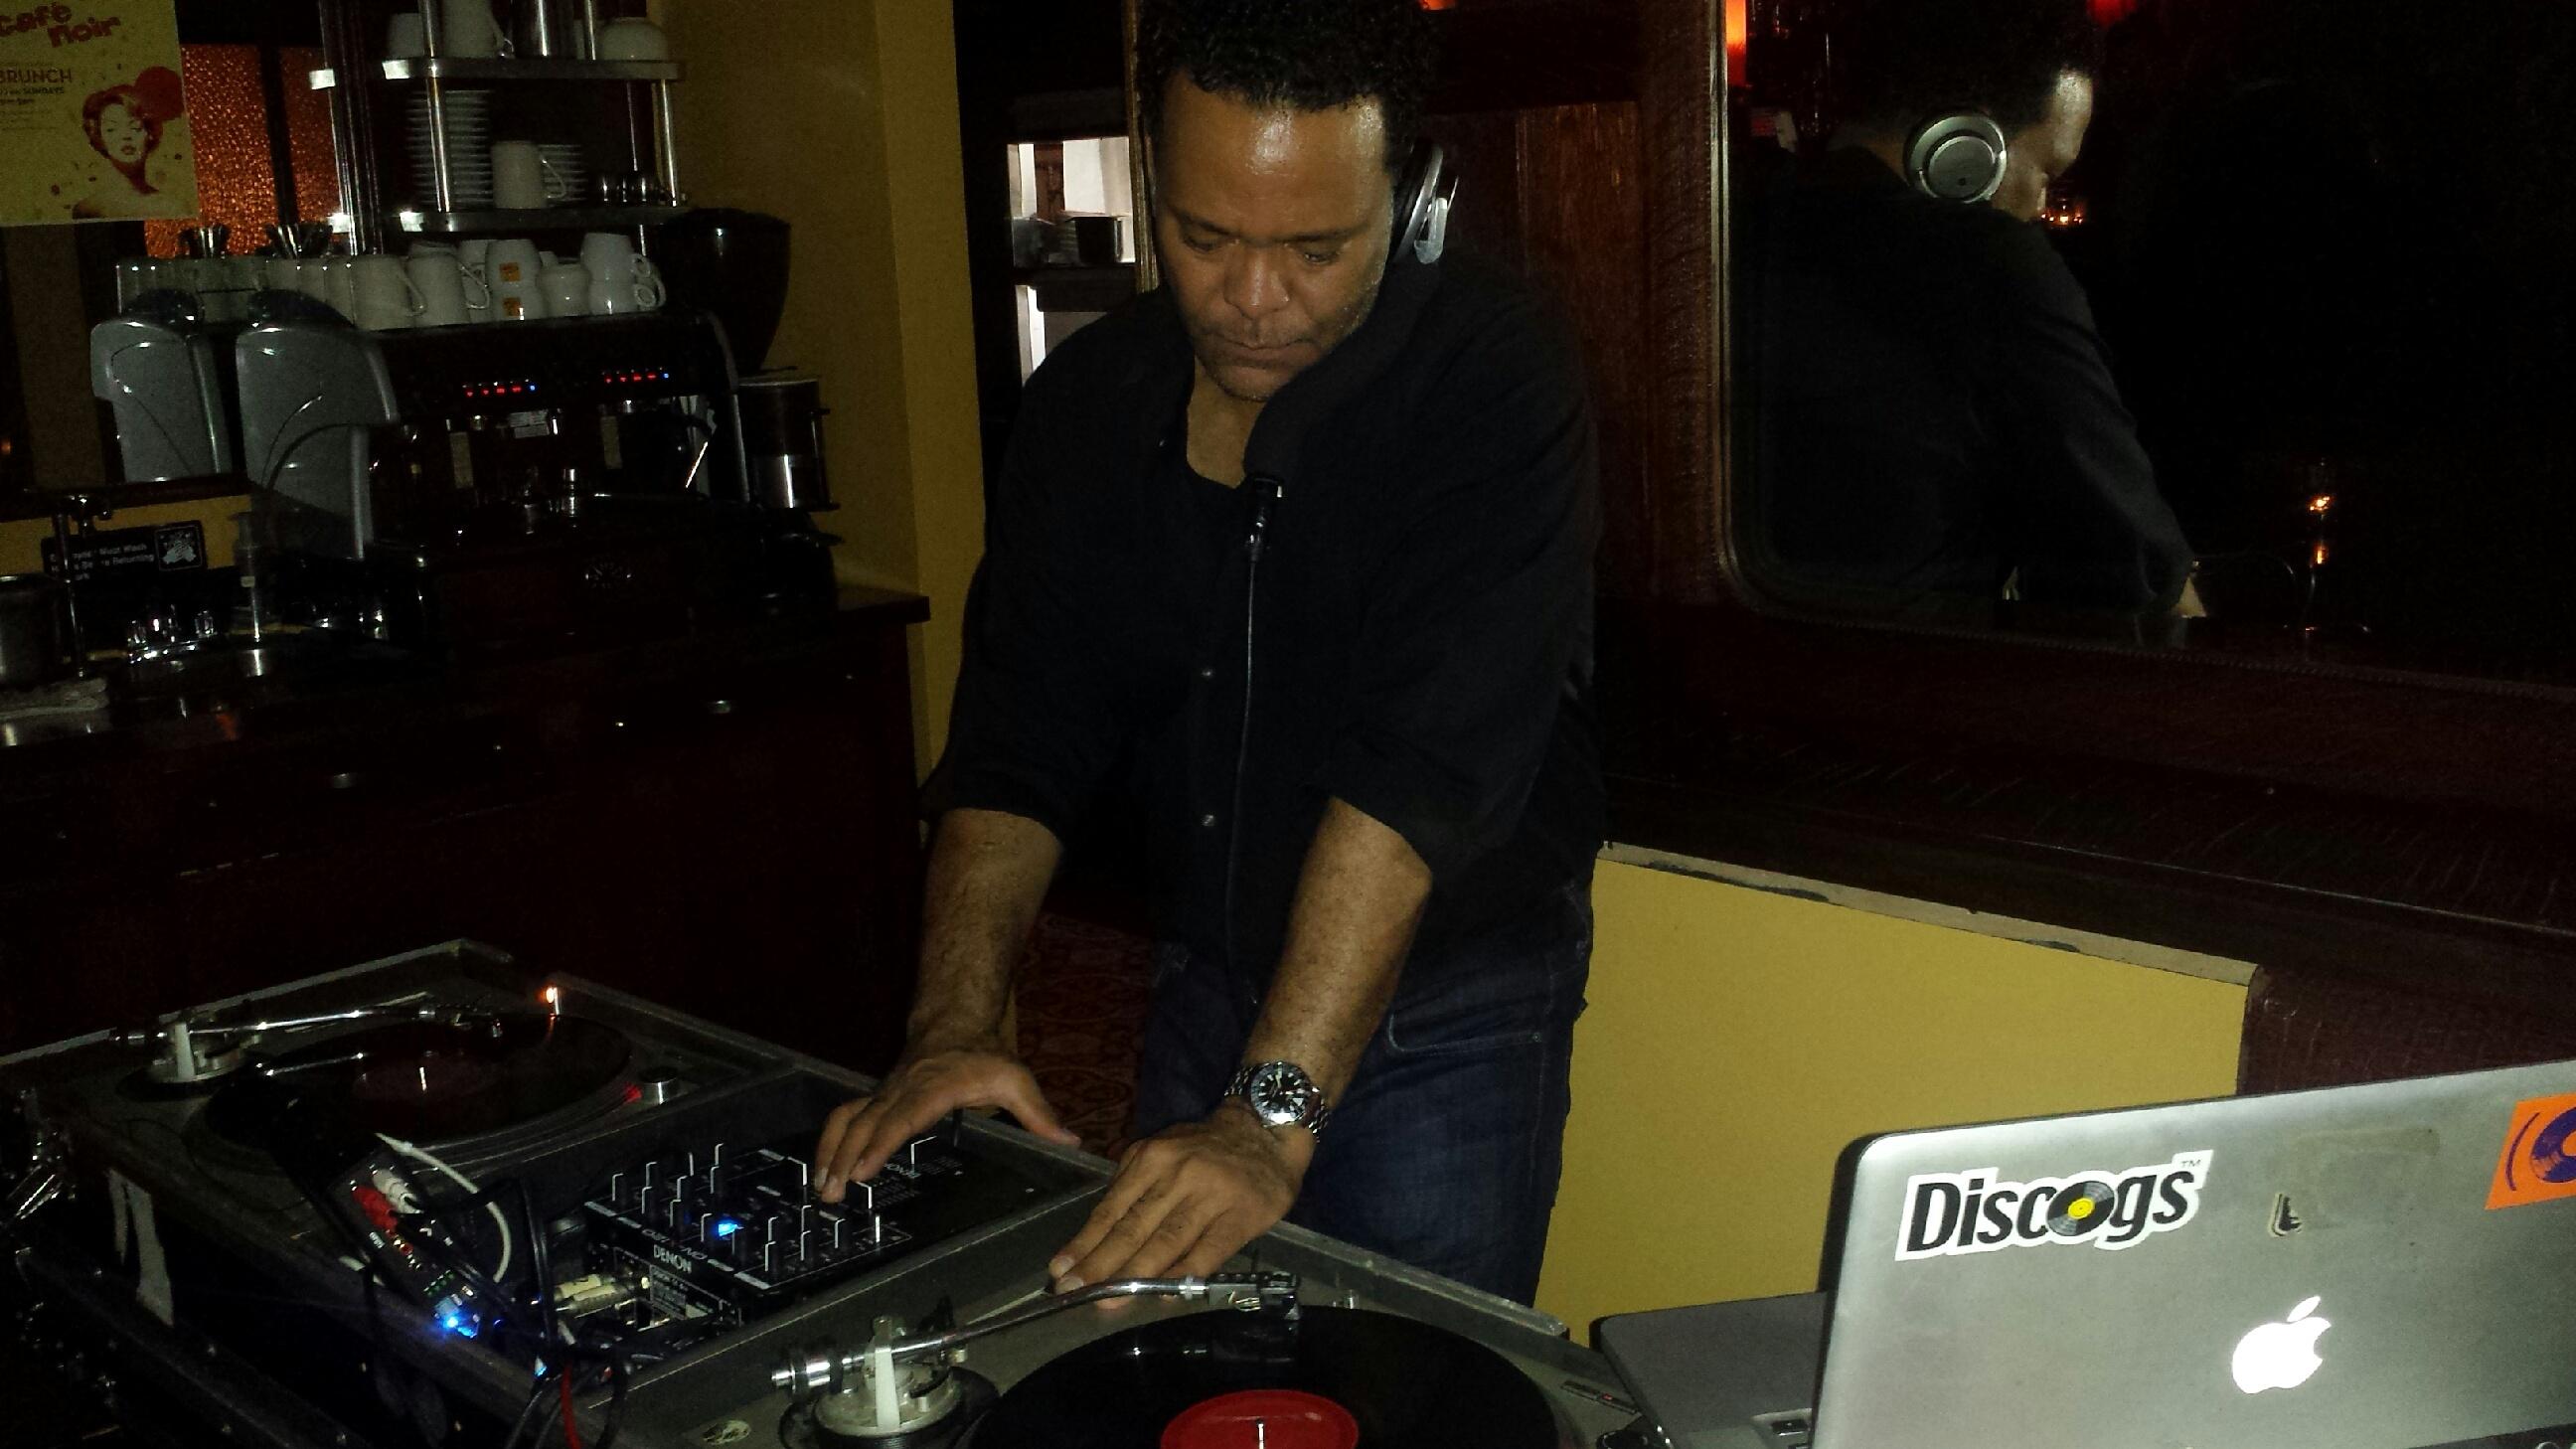 Spinning the SouliciousNYC party at Cafe Noir NYC